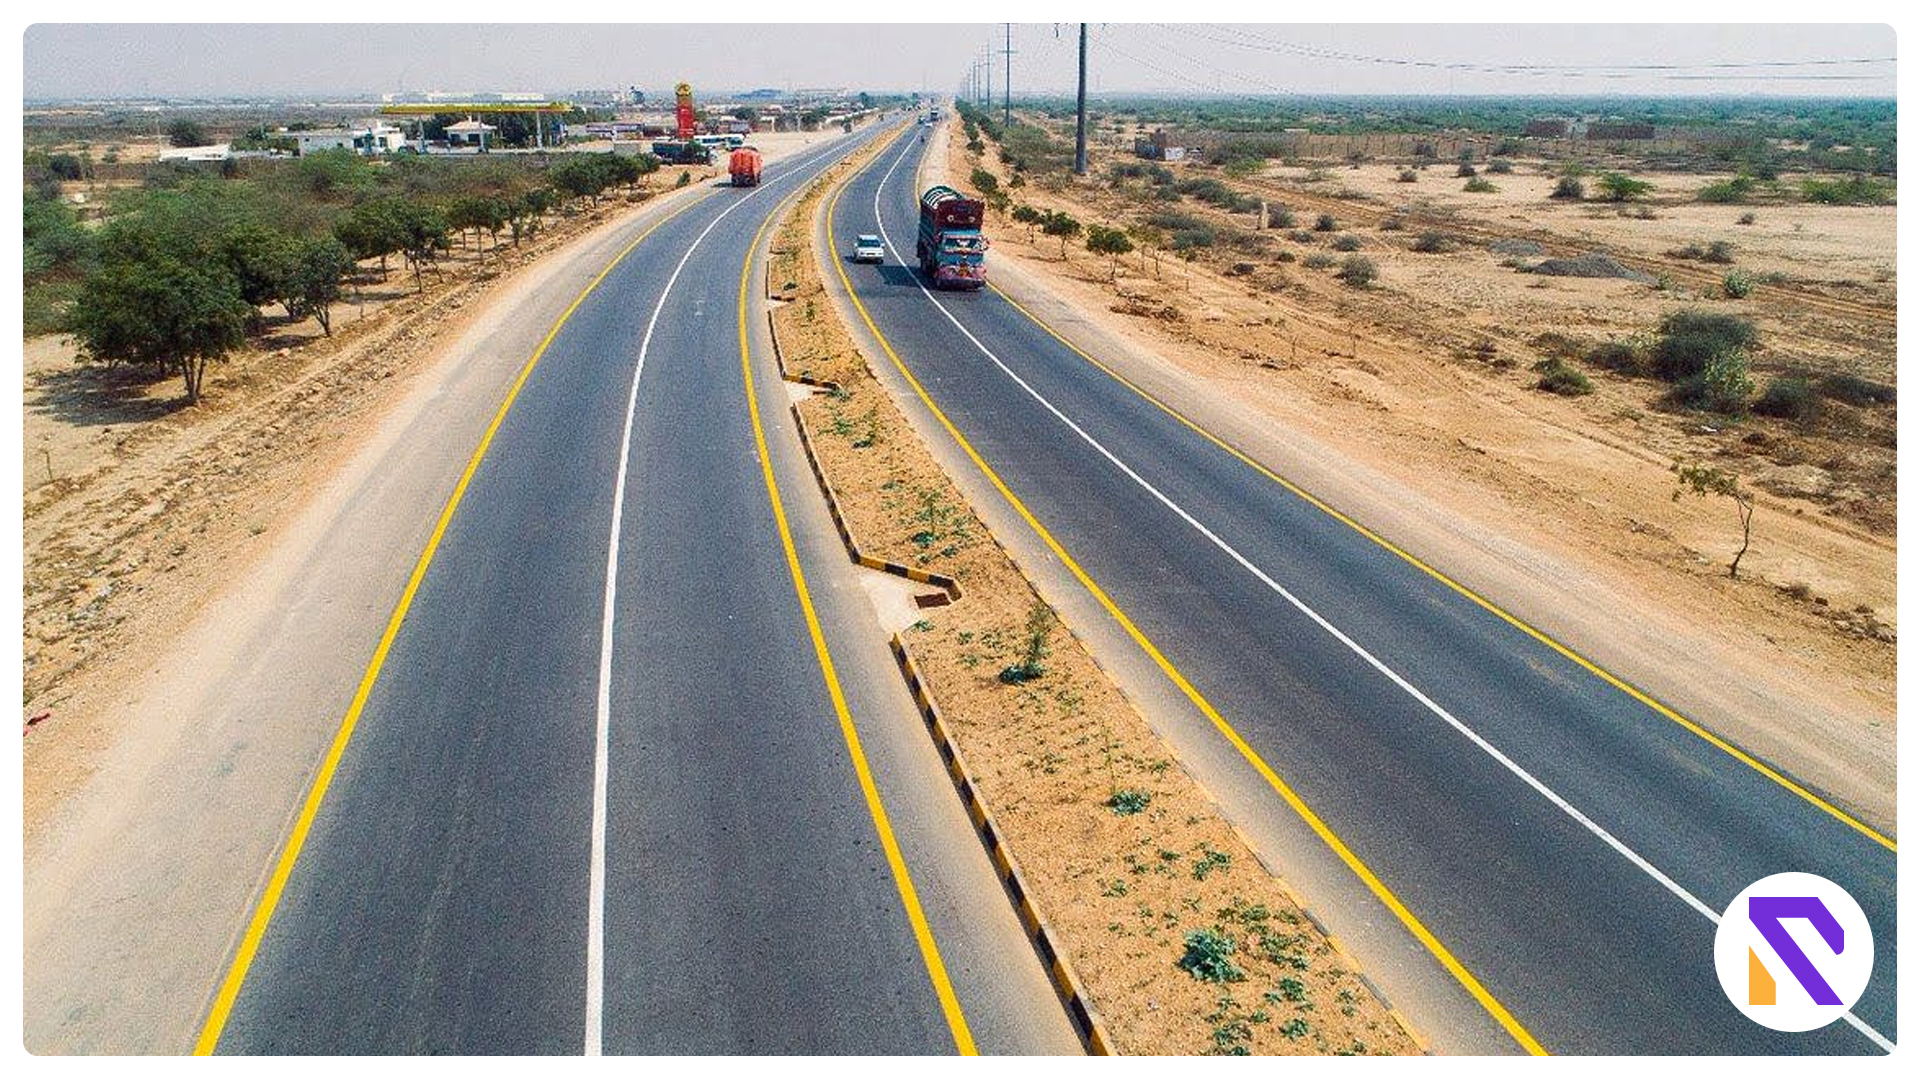 Over 38.2 billion Rupees is Spent on Road Development Projects in Sindh